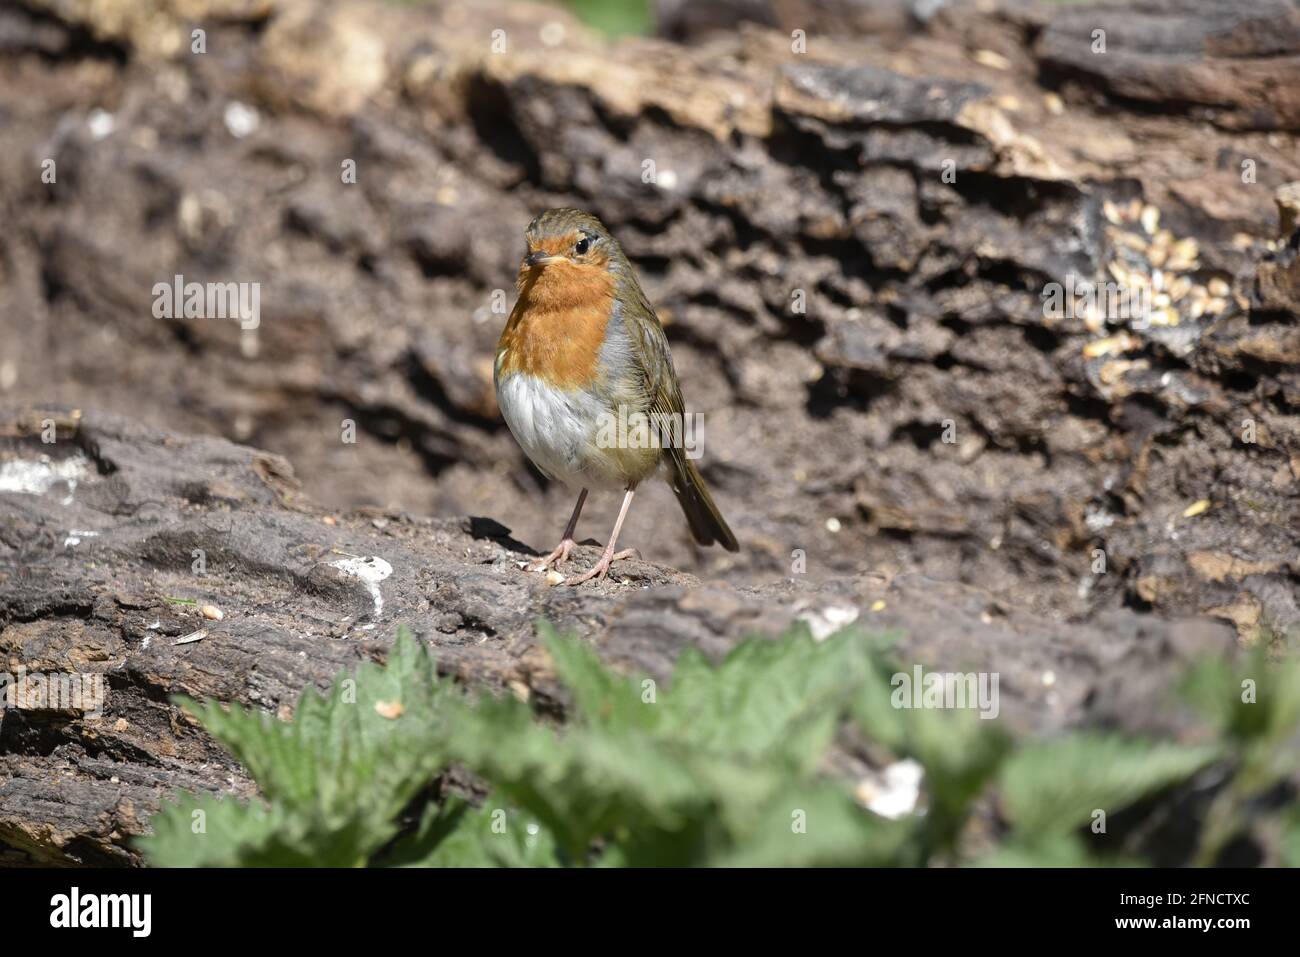 European Robin (Erithacus rubecula) Facing Camera with Decaying Tree Log Background in April in the UK Stock Photo